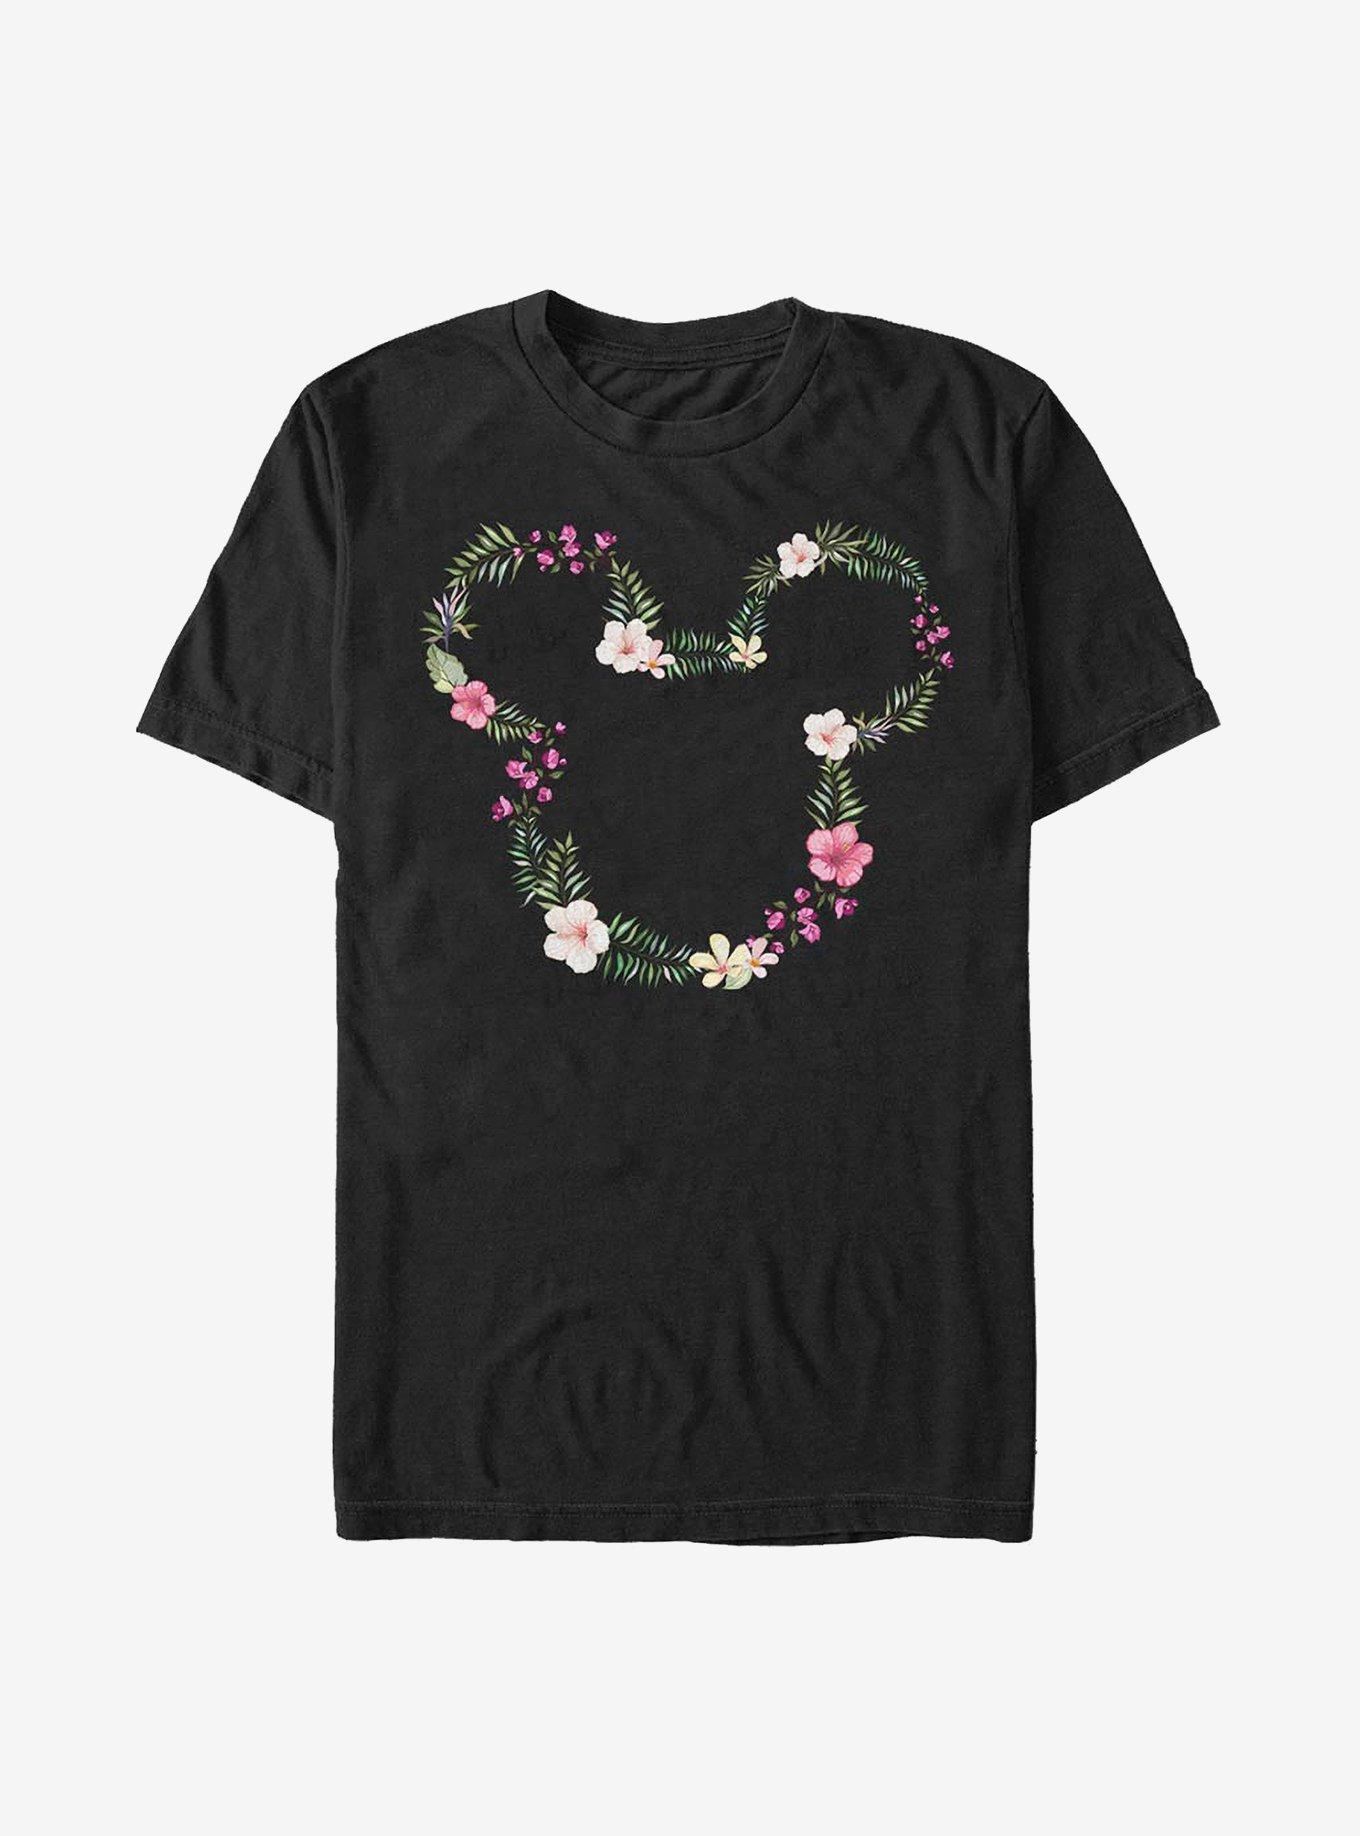 Disney Mickey Mouse Floral Mickey T-Shirt, BLACK, hi-res